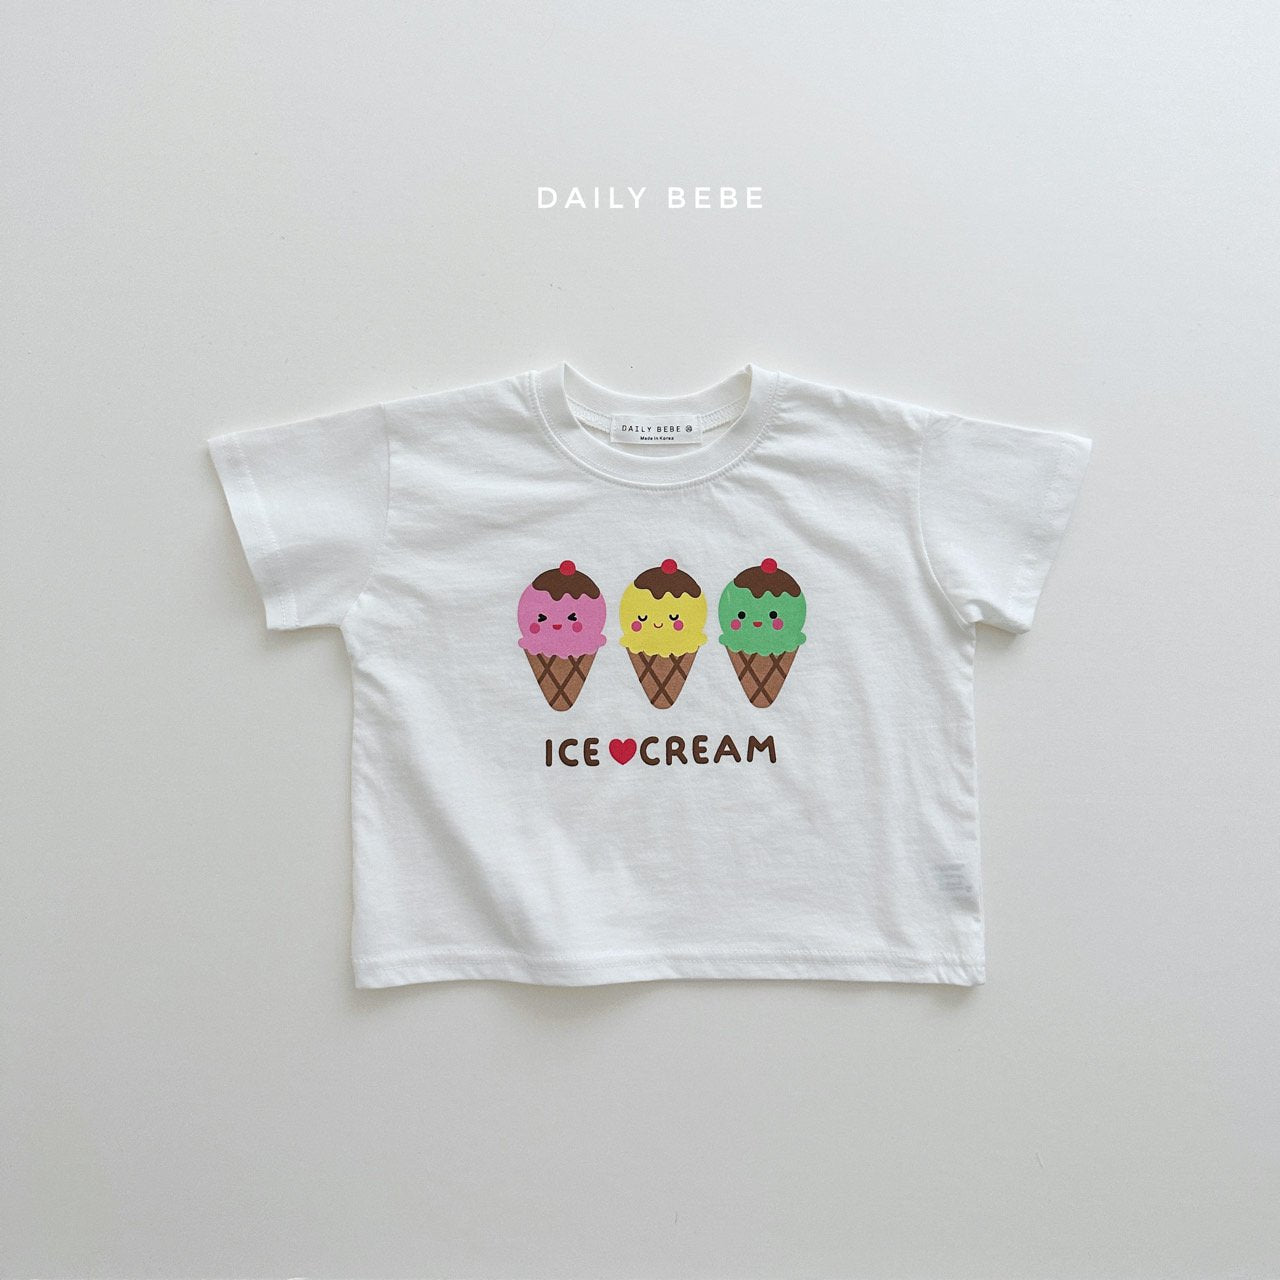 All the Flavors Ice Cream T-Shirt